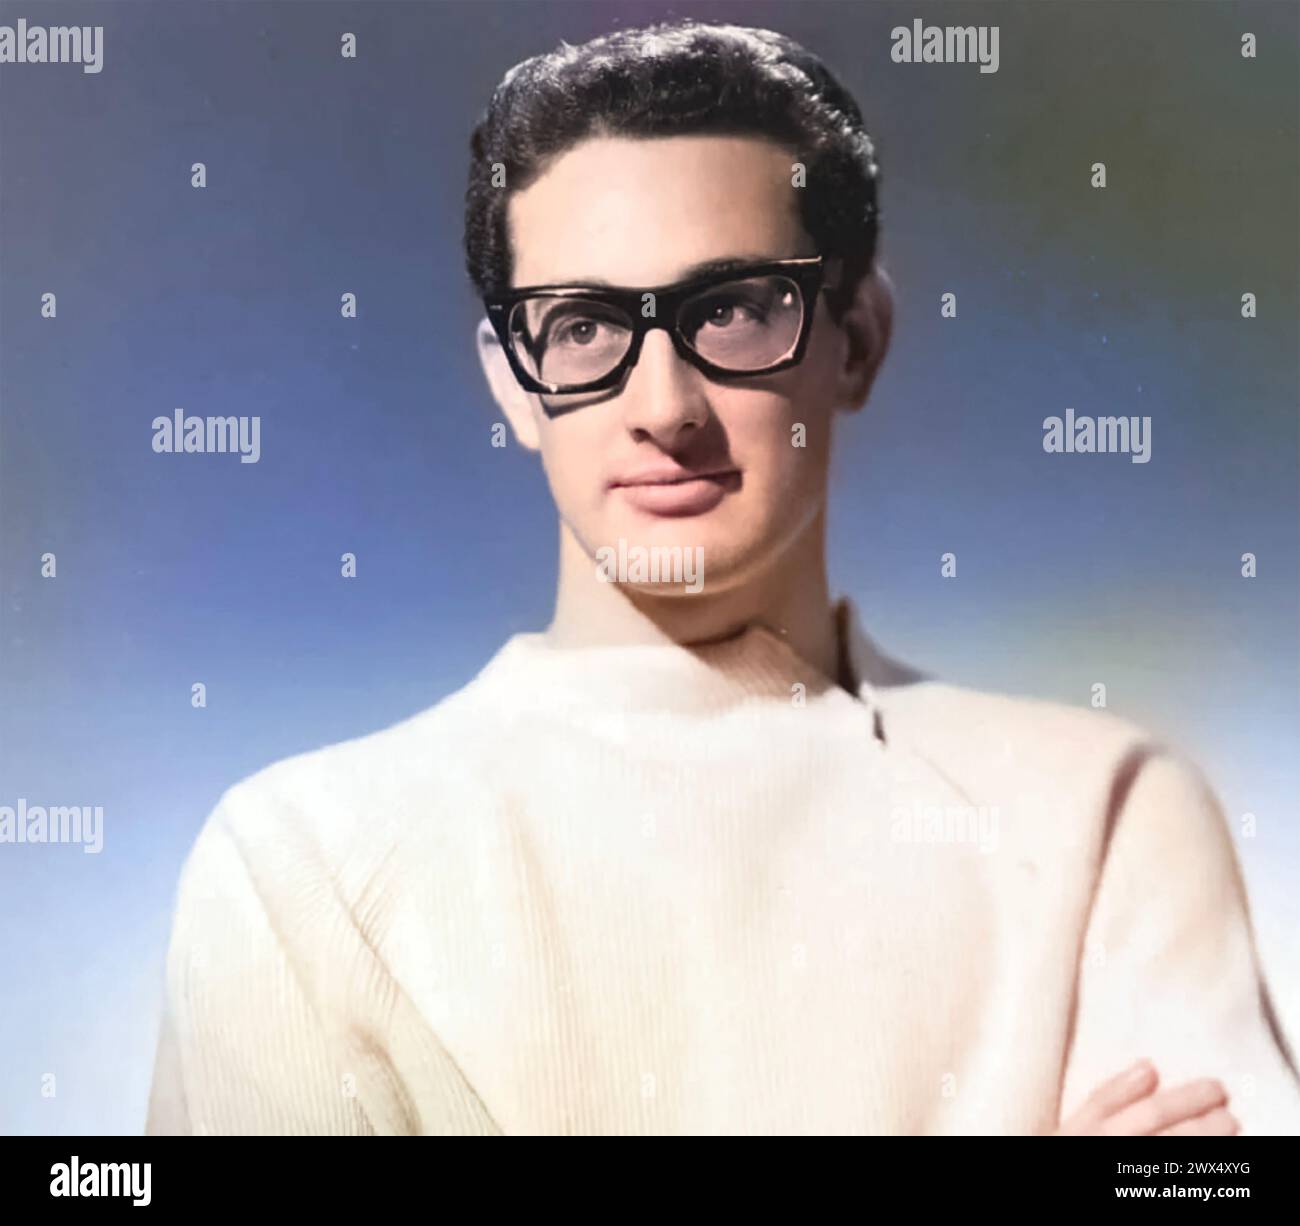 BUDDY HOLLY (1936-1959) American rock n roll singer about 1957 Stock Photo